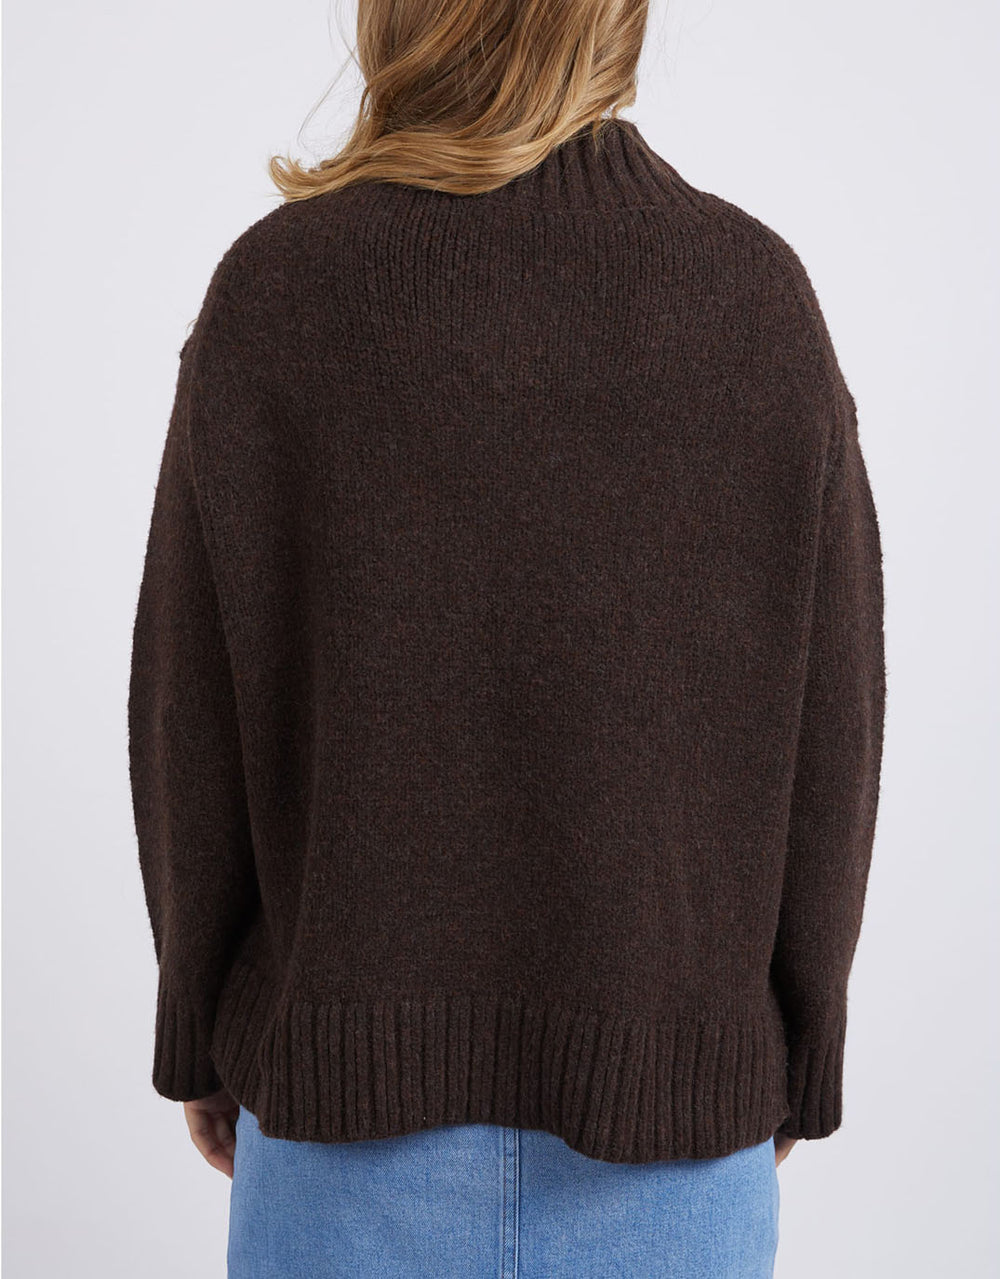 foxwood-pepper-knit-chocolate-womens-clothing